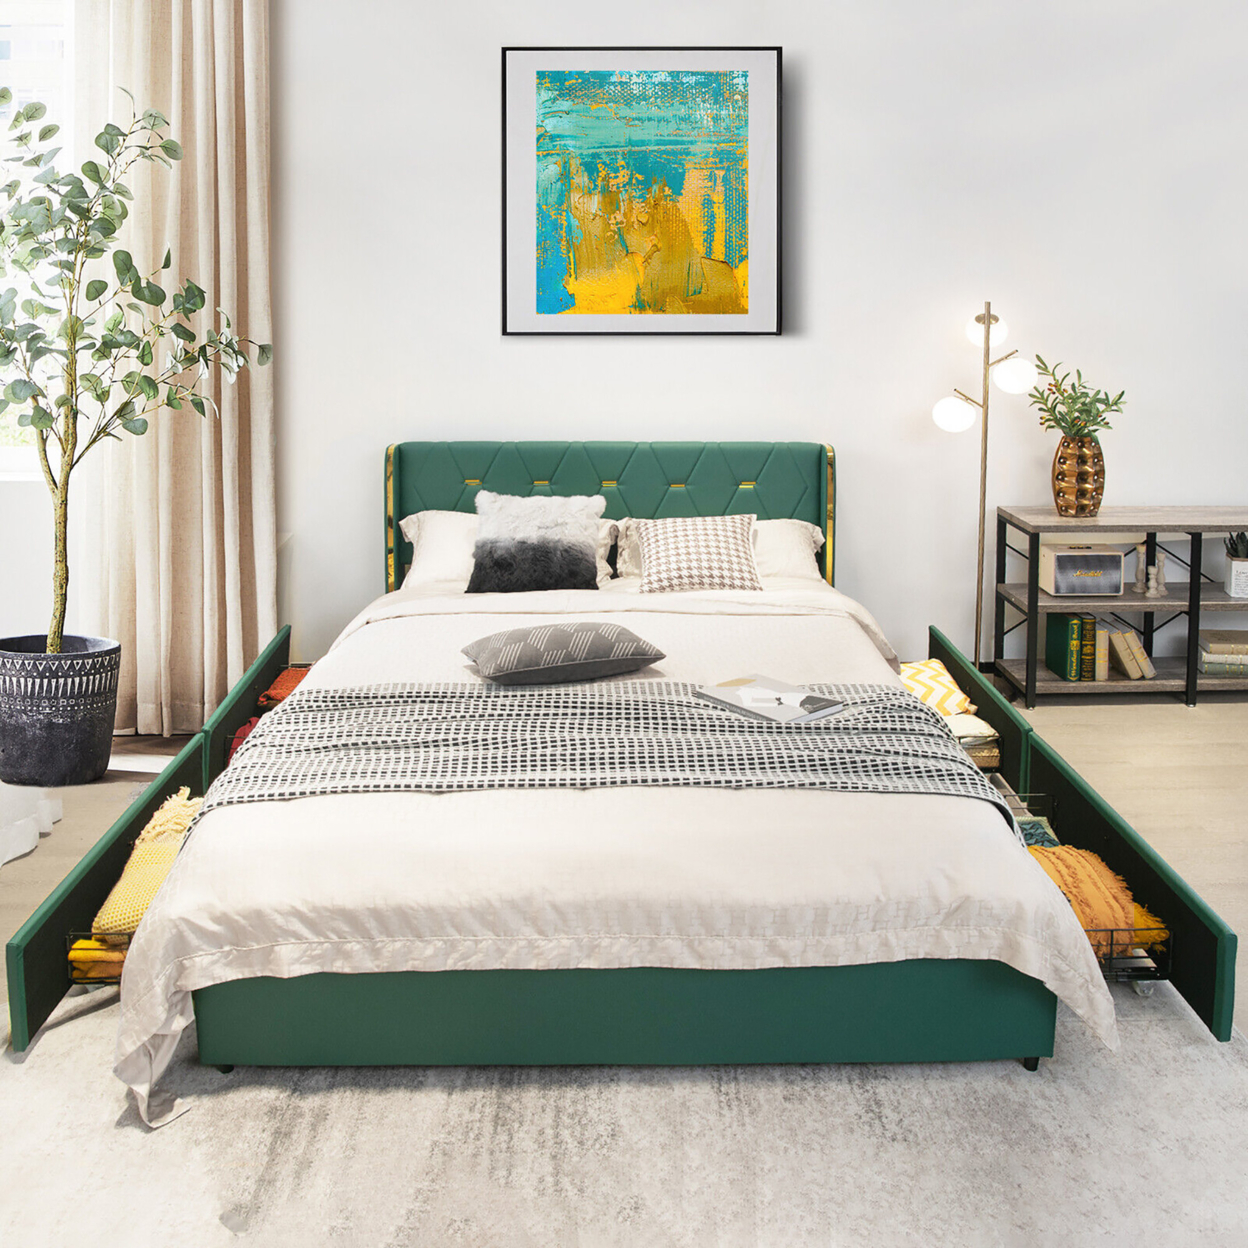 Gymax Queen Upholstered Bed Frame With 4 Storage Drawers PU Leather Headboard Green